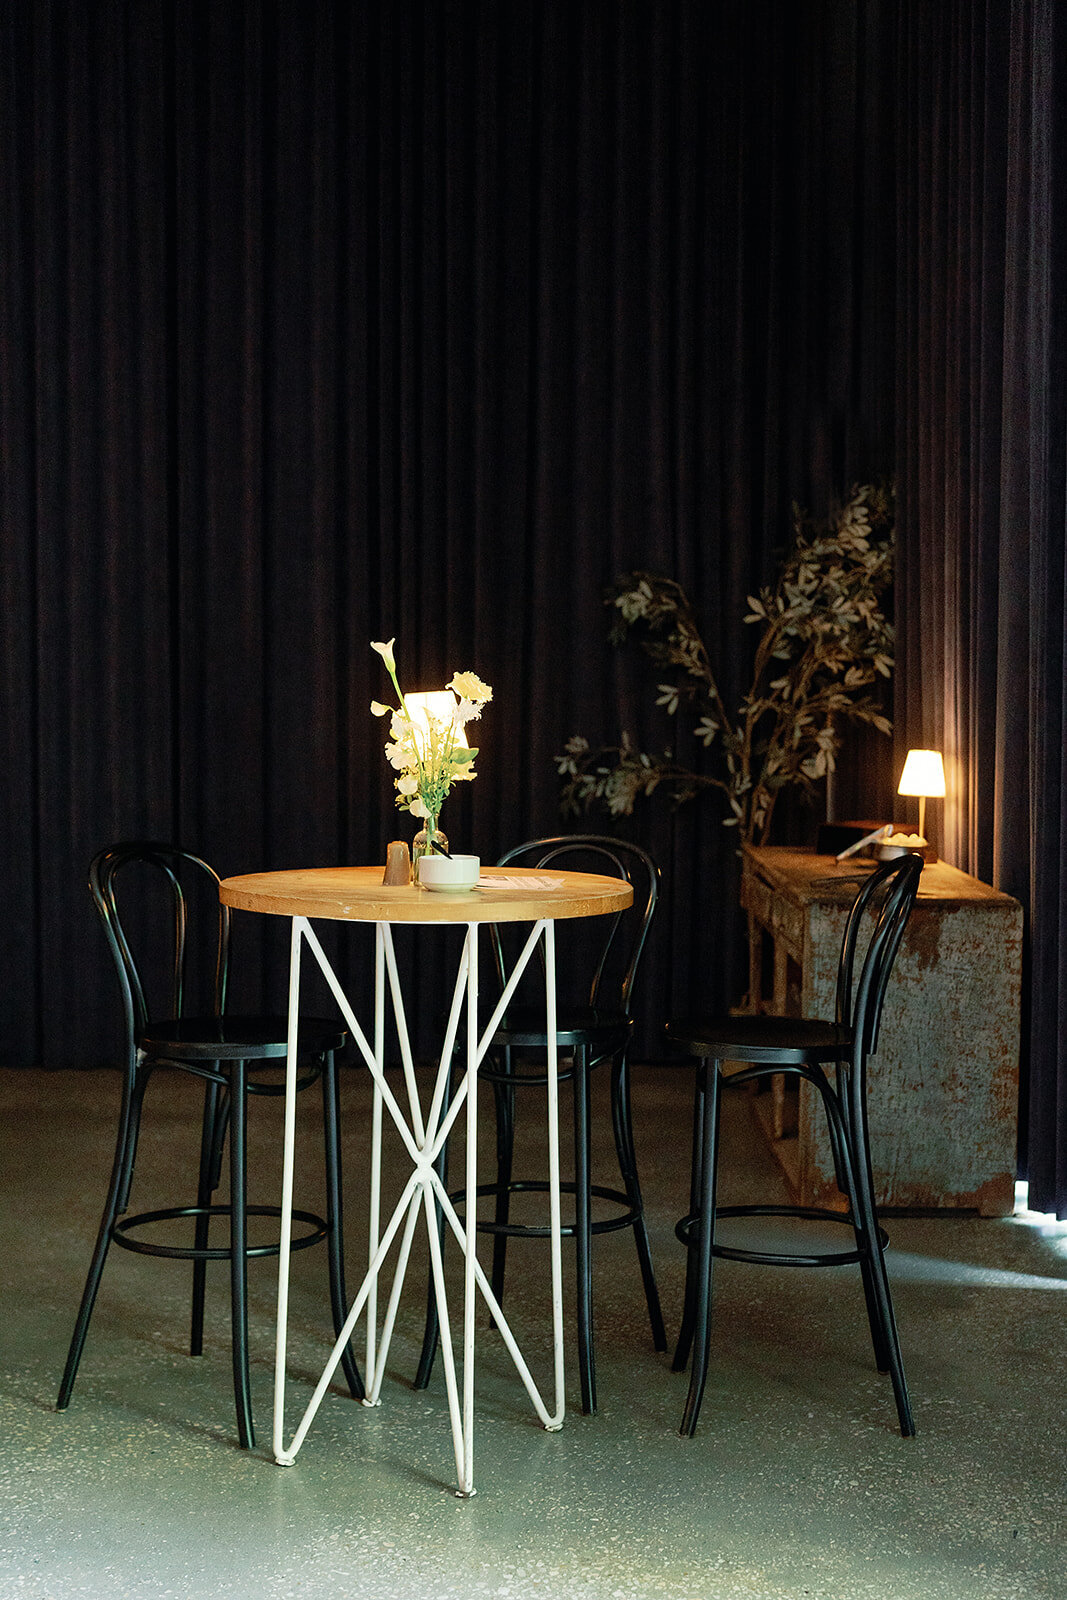 A black hightop table with black chairs in the reception room at the South Congress hotel